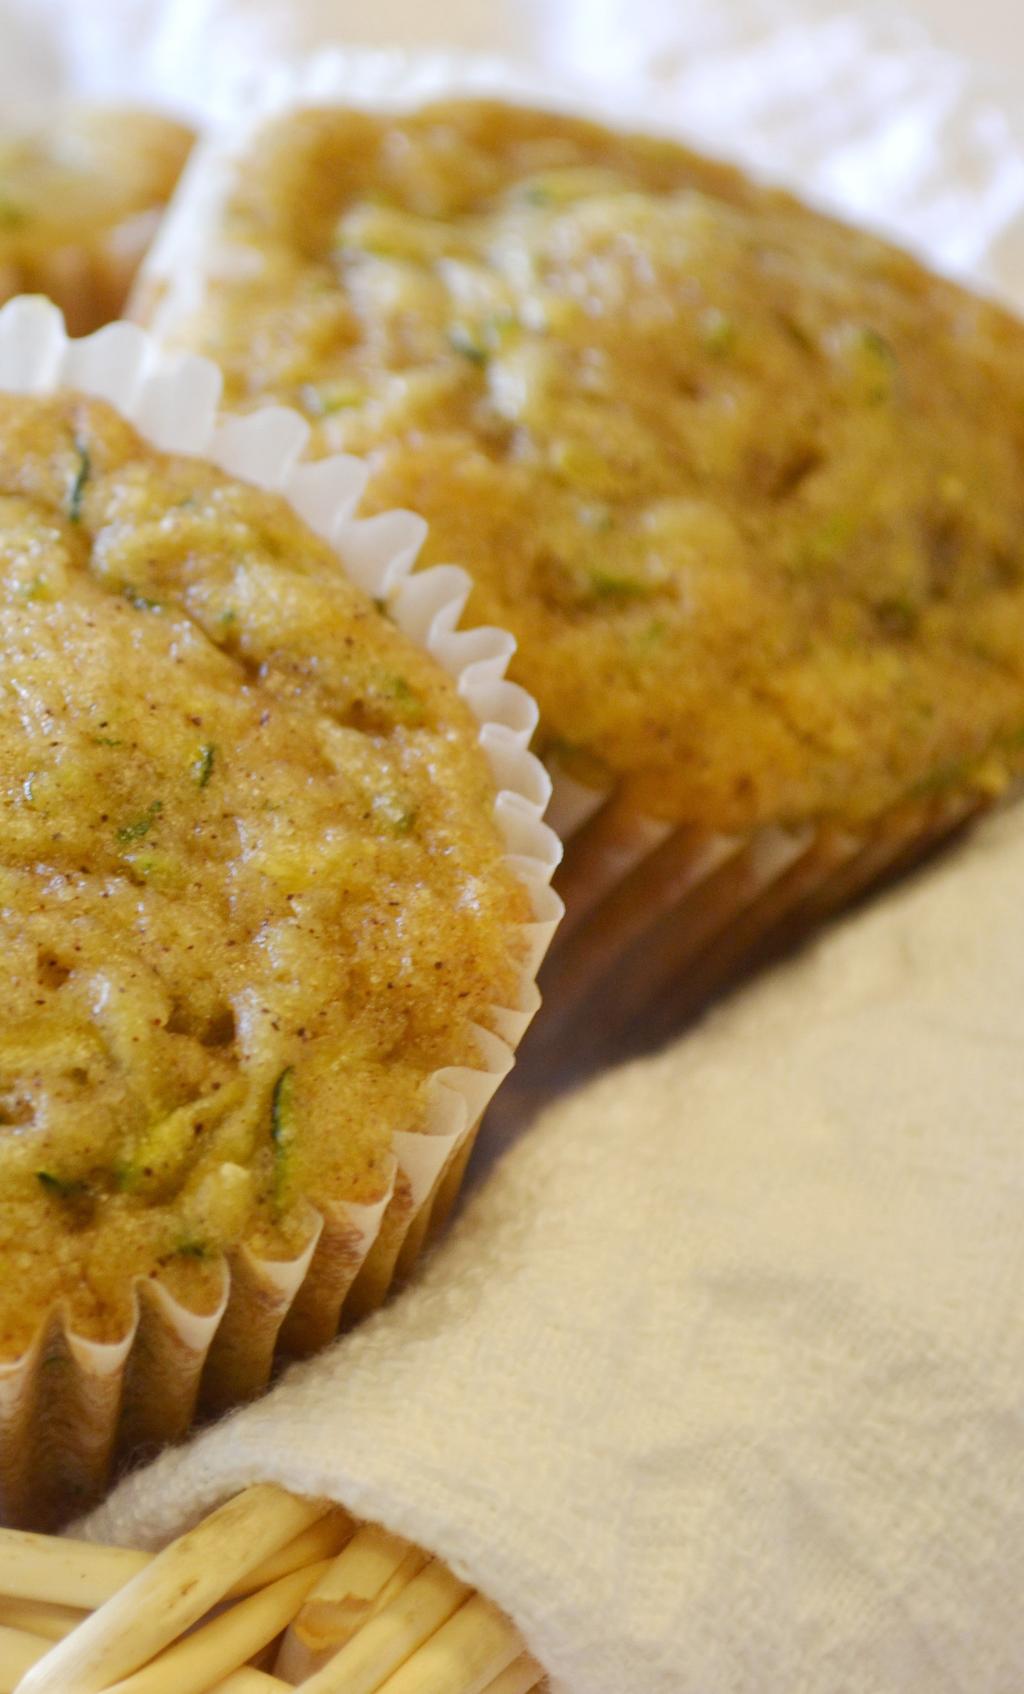 ZUCCHINI MUFFINS 30 min 12 servings 1 ½ cups all-purpose flour 1 cup sugar ½ teaspoon baking powder ½ teaspoon baking soda ½ teaspoon ground cinnamon ½ teaspoon salt ½ cup butter, melted 2 Eggland s